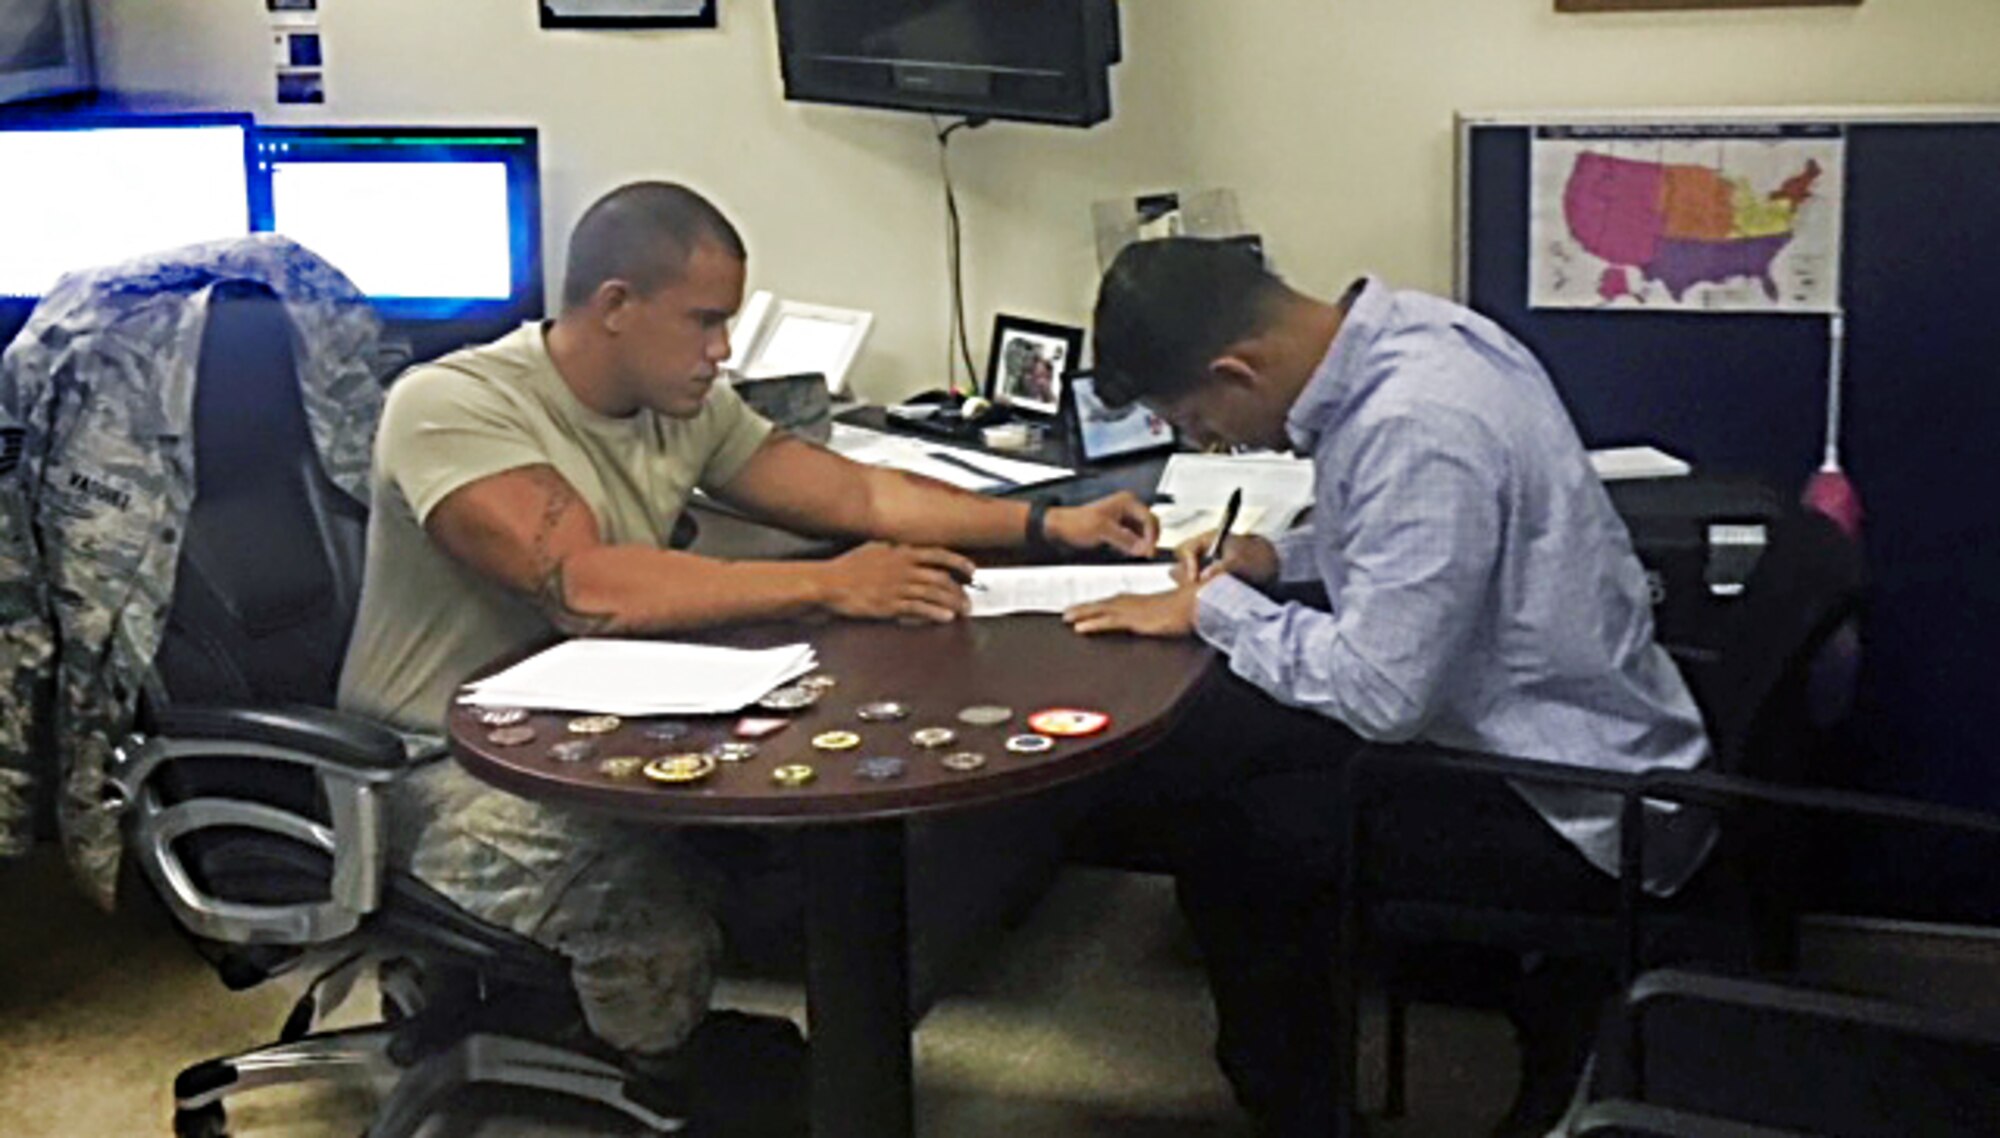 A picture of Tech. Sgt. Freddy Vasquez assisting a new recruit with paperwork.